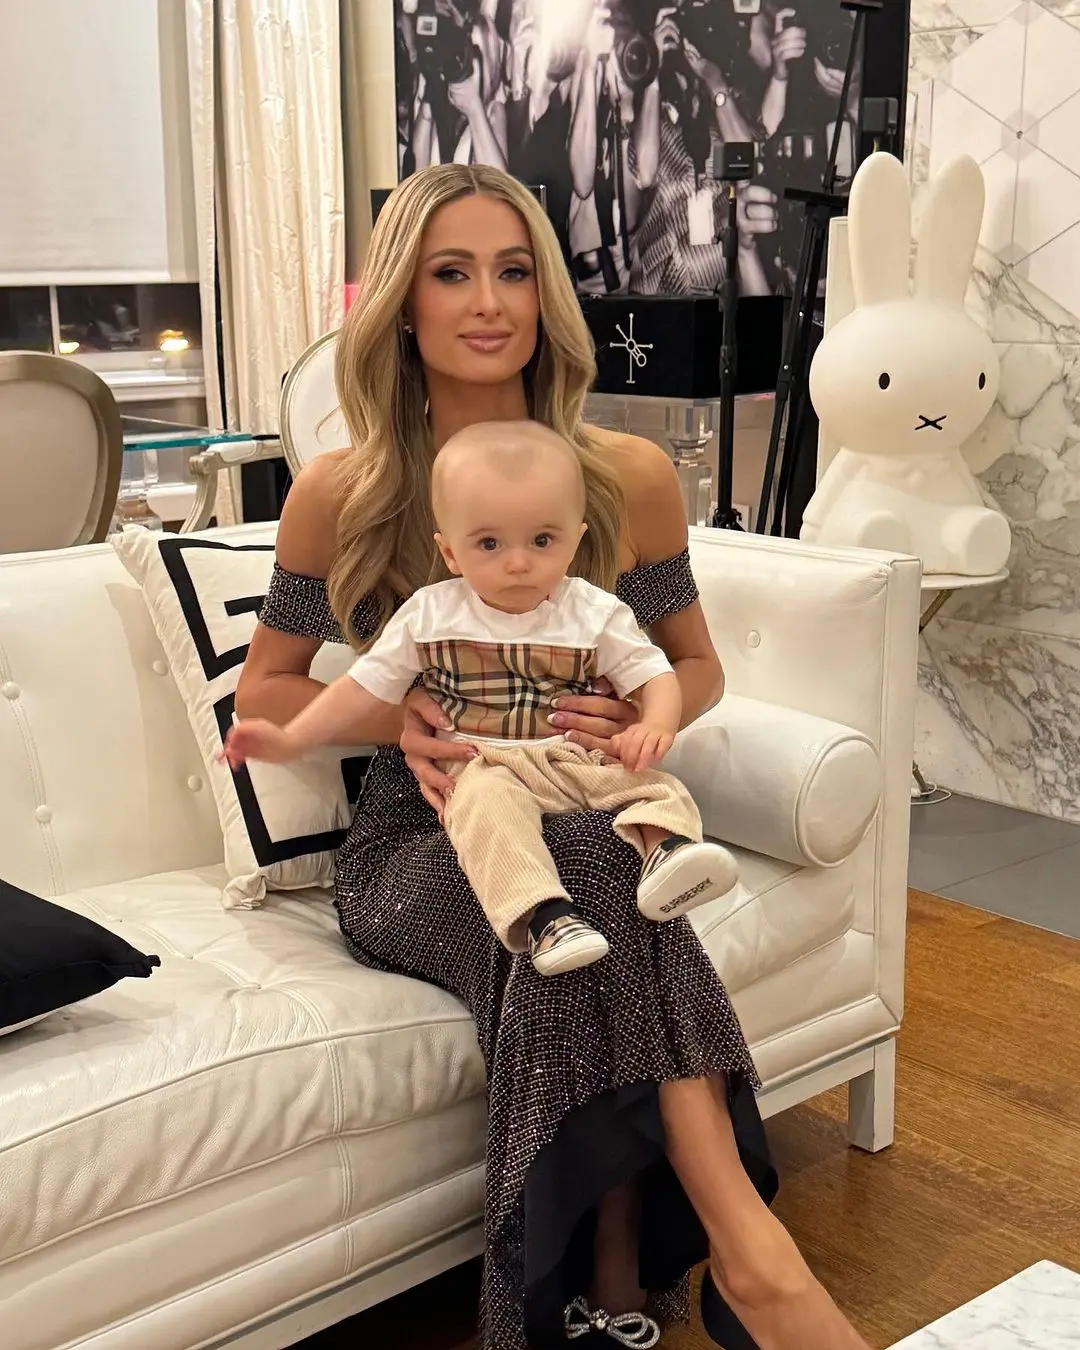 Exposed: Paris Hilton's Car Seat Mishap Raises Eyebrows and Safety Concerns!